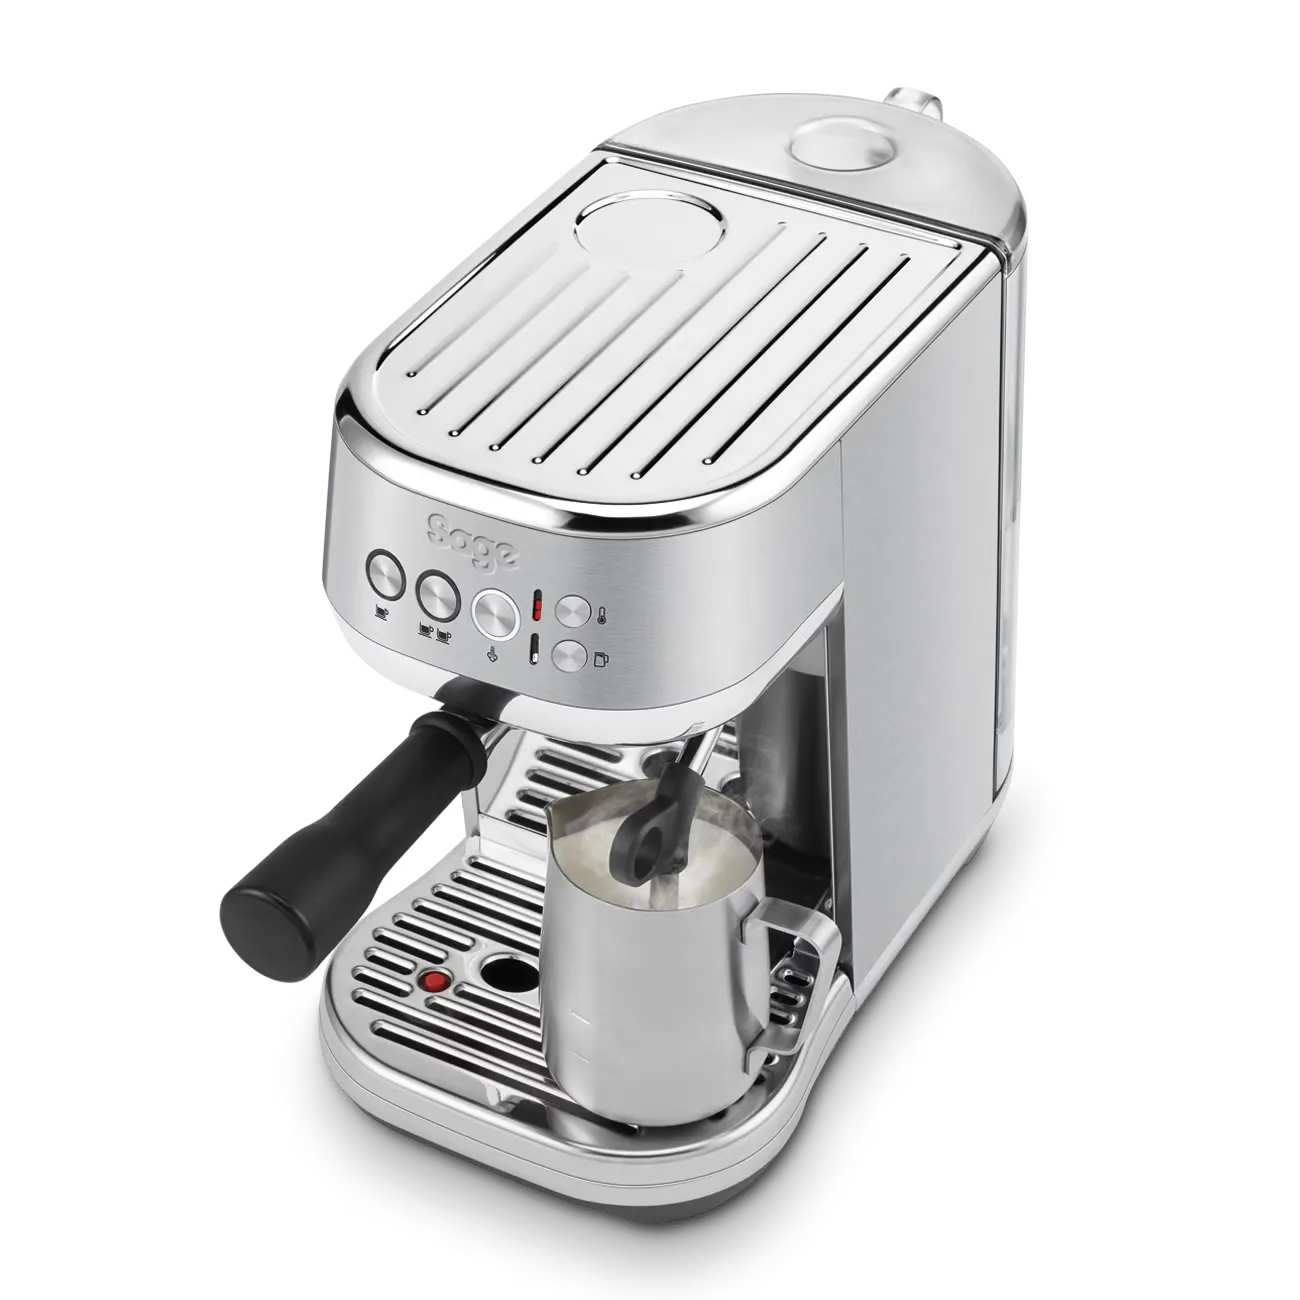 Perspective picture of coffee machine Bambino Plus from Sage in brushed stainless steel